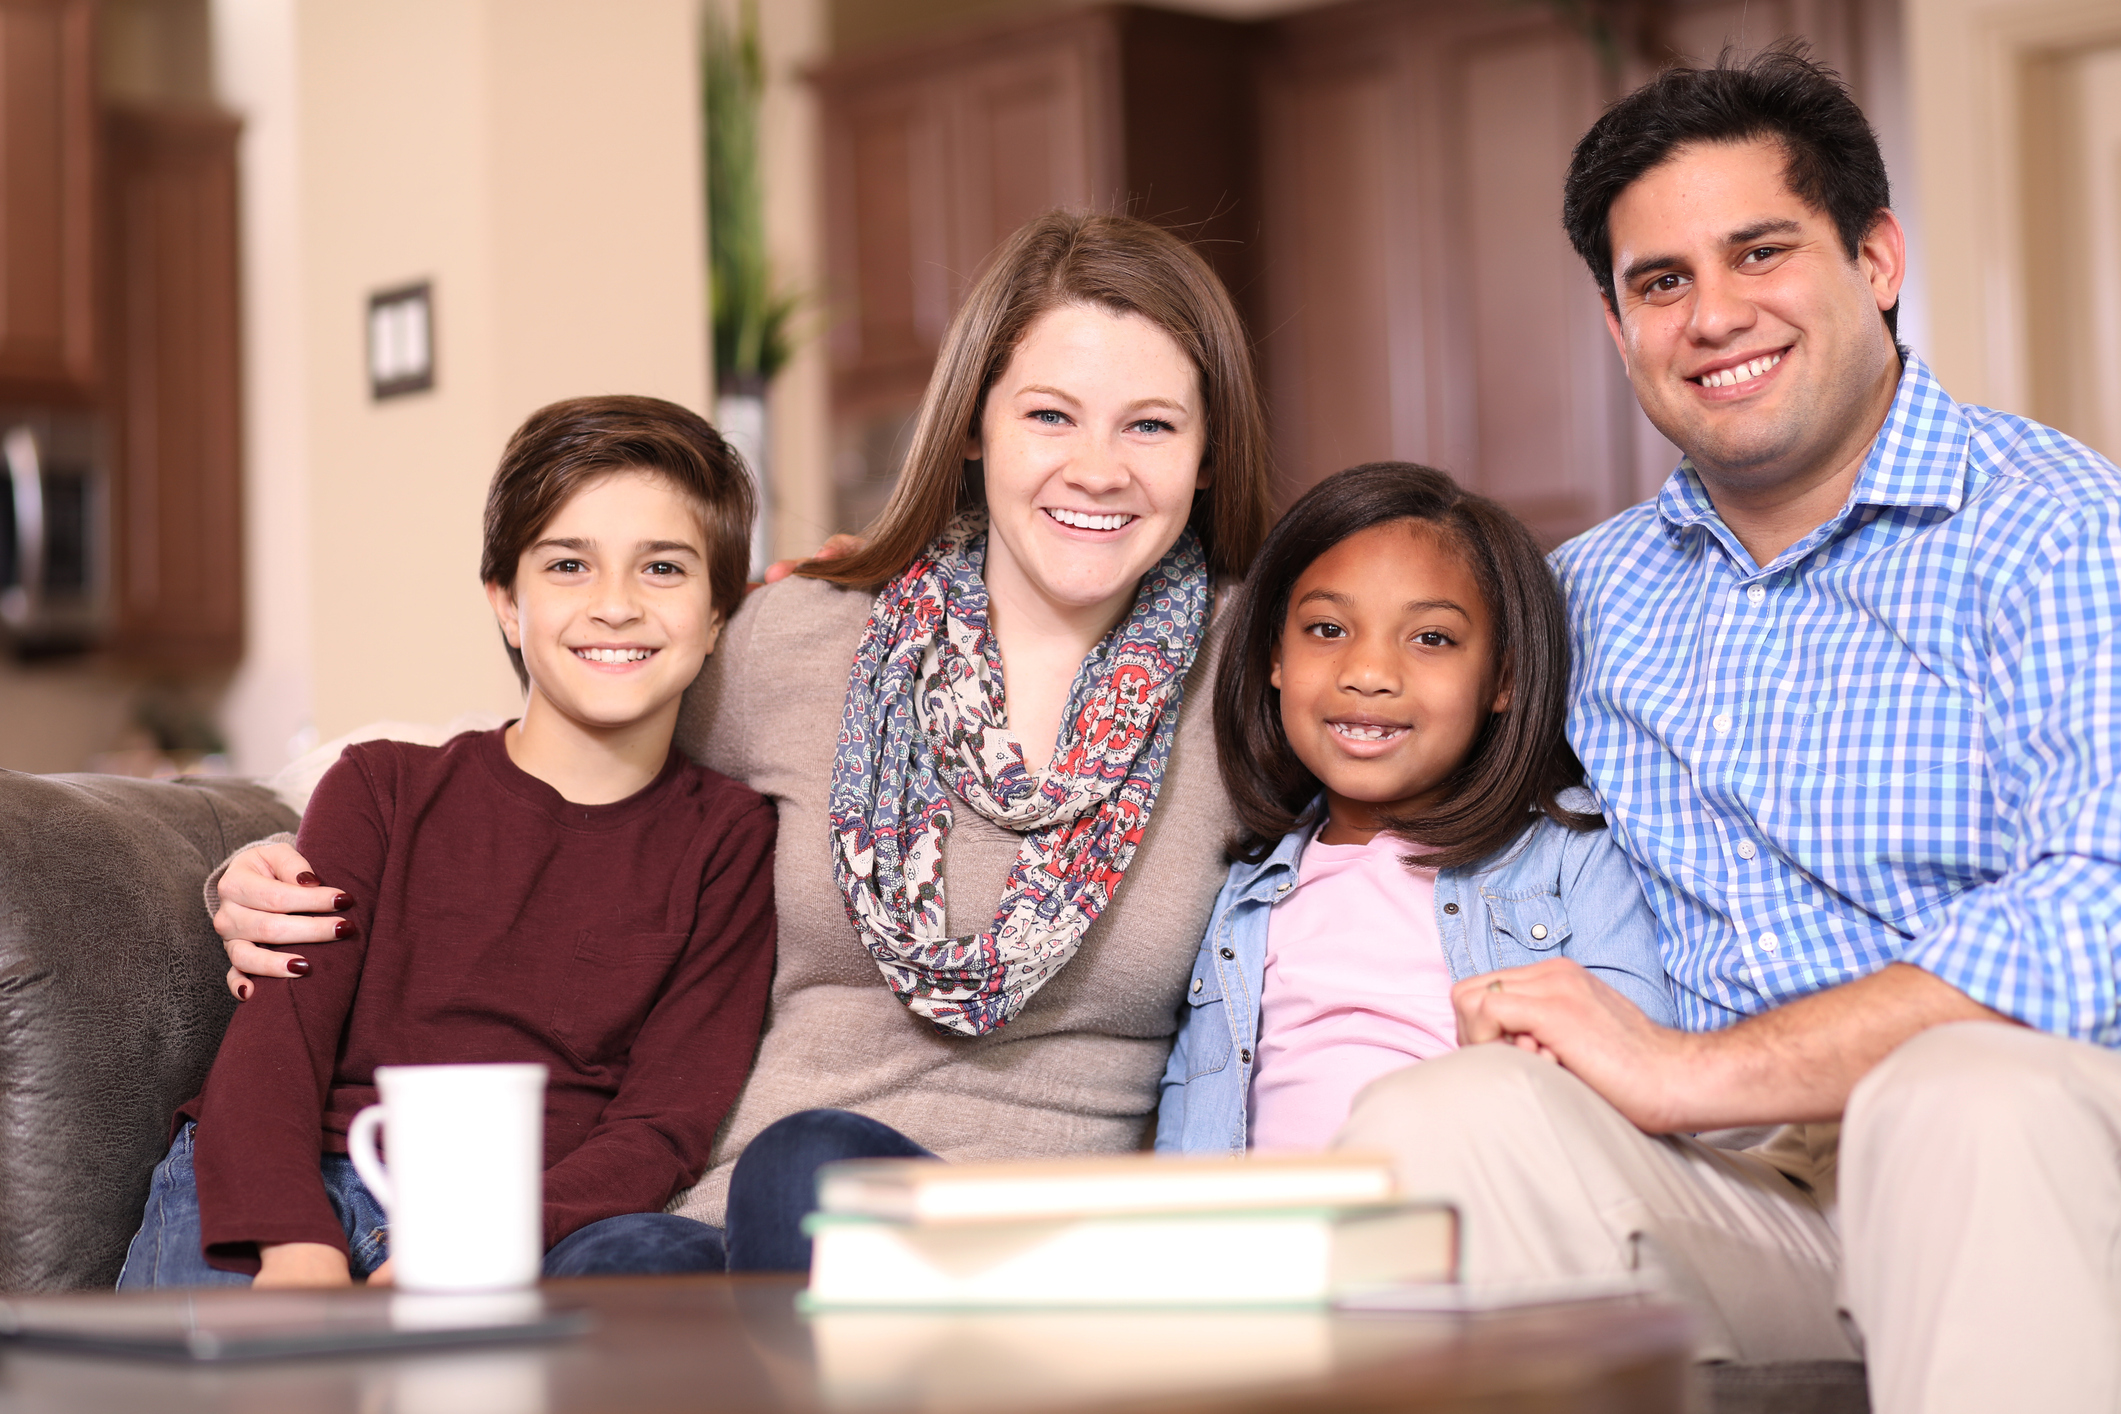 Multi-ethnic, adoption or foster care family at home.